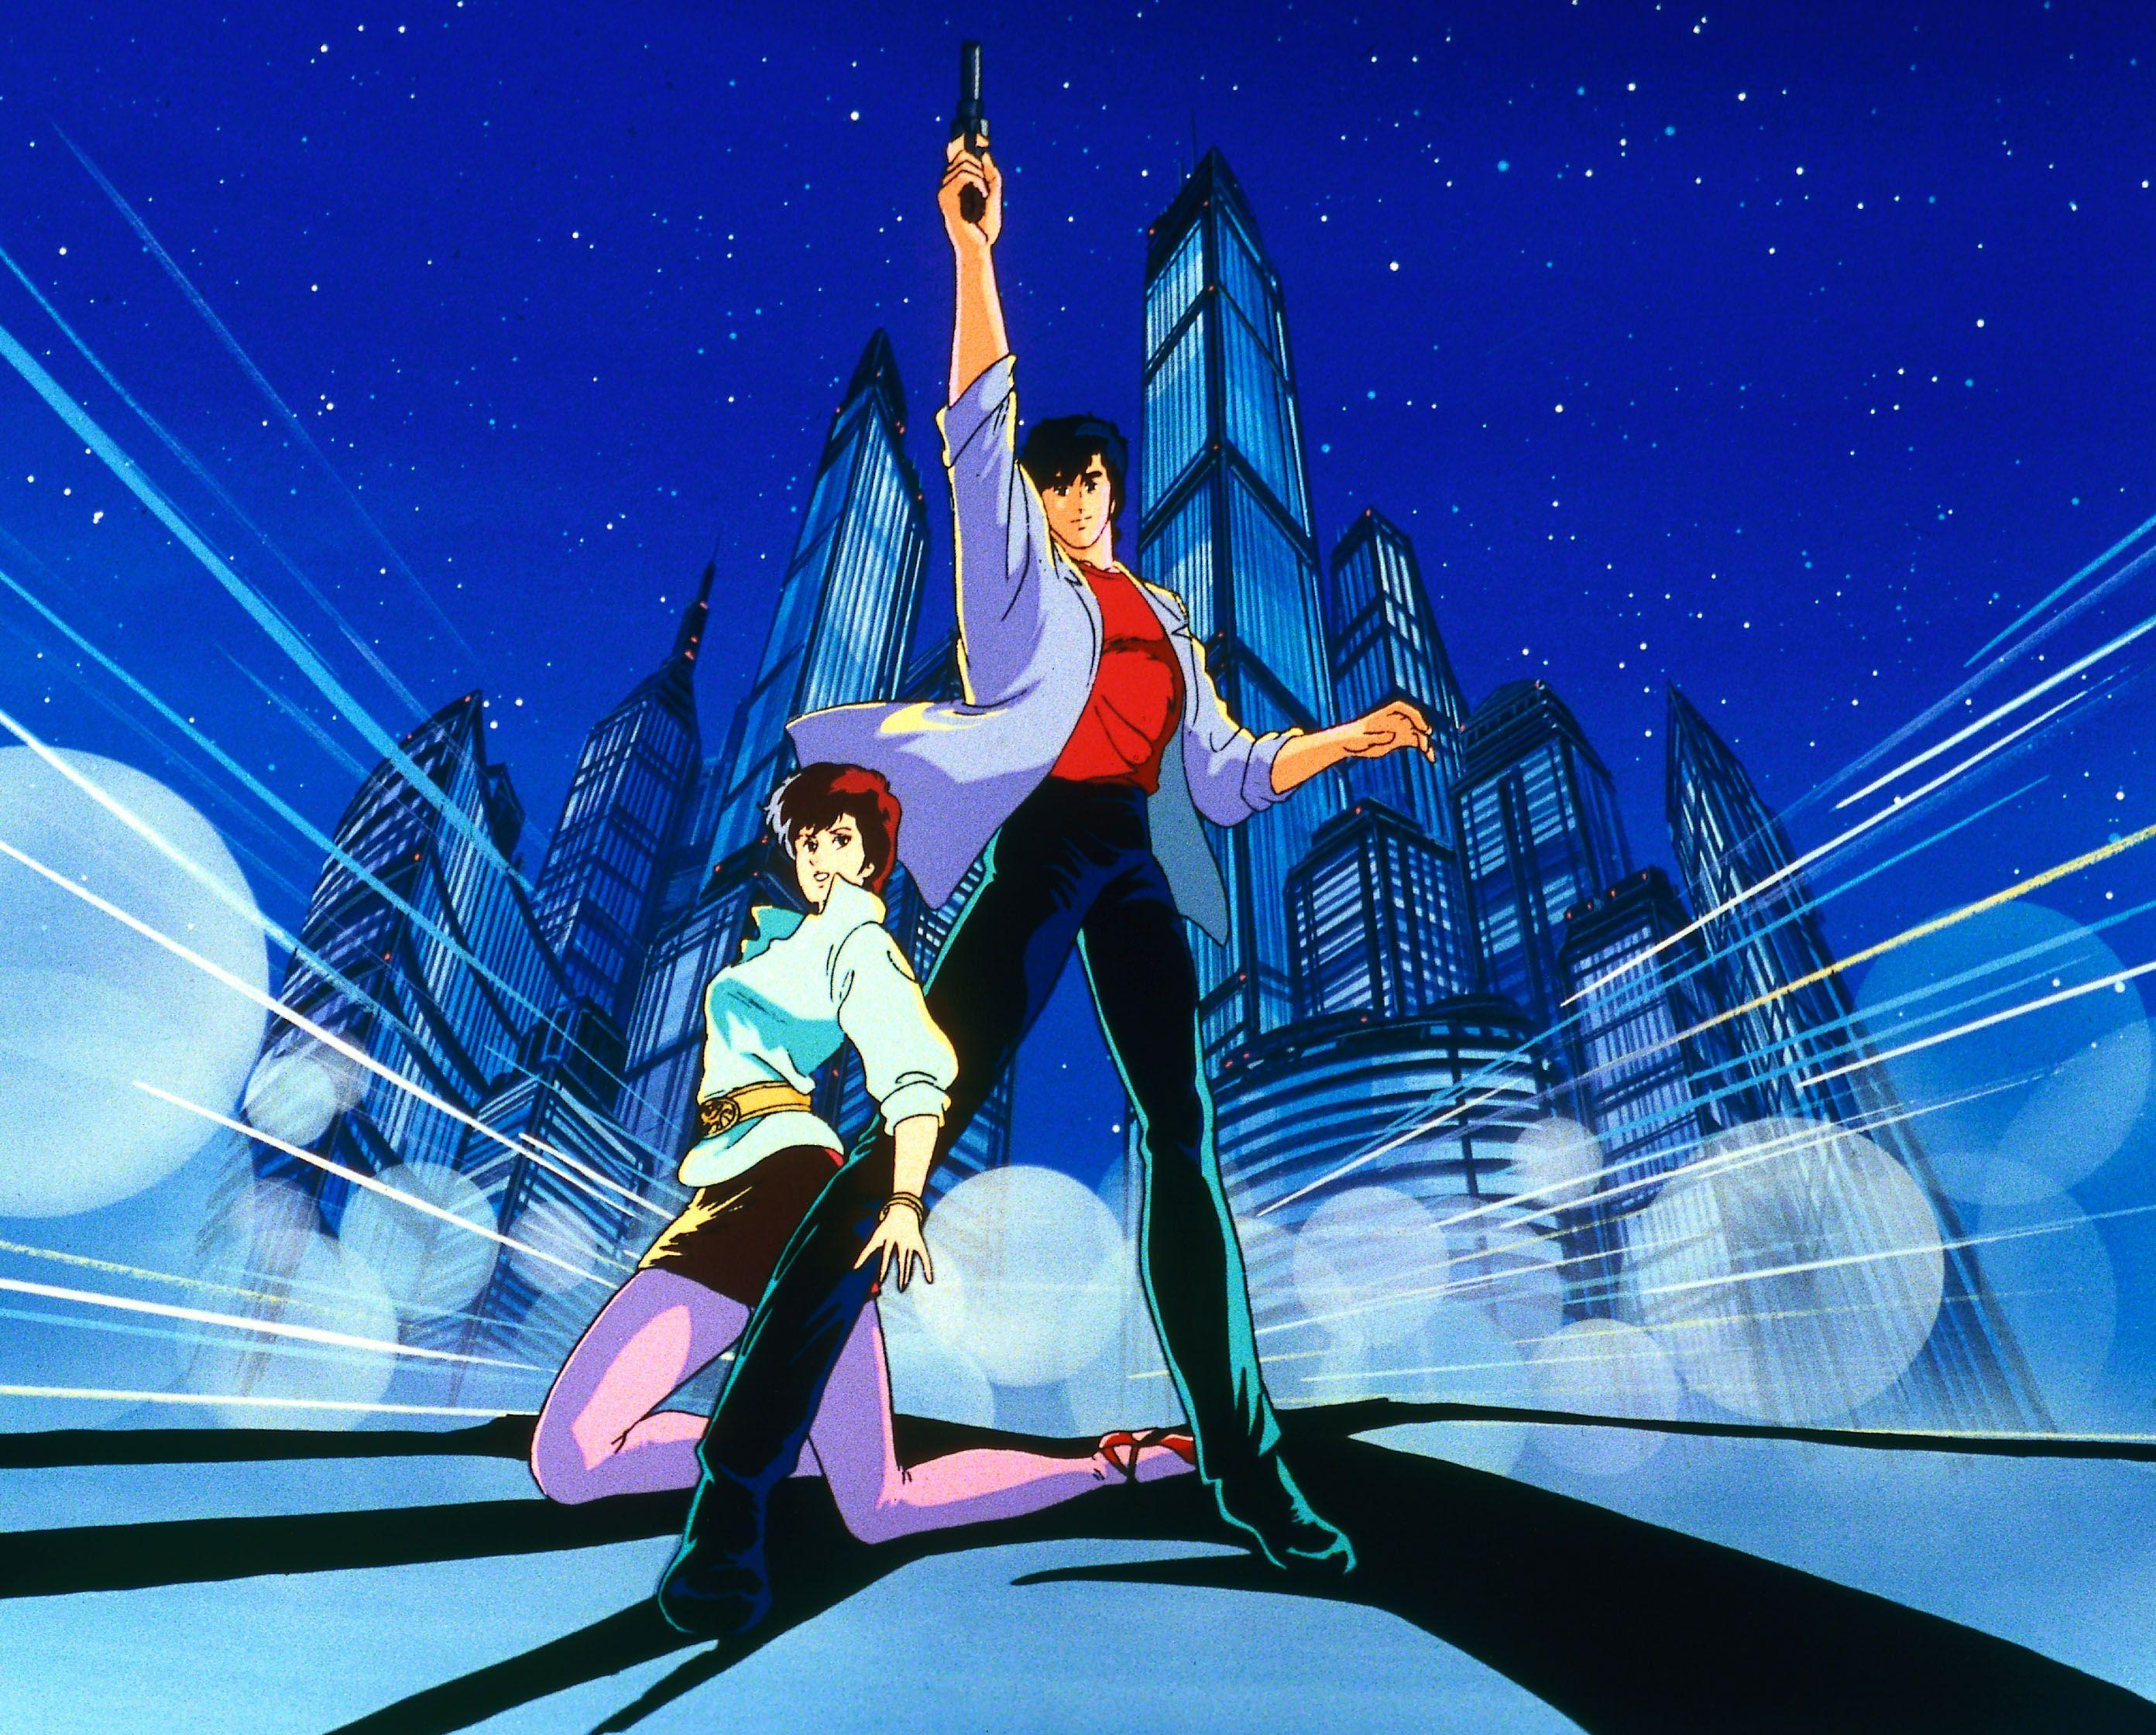 City Hunter Anime Hd Wallpapers - Wallpaper Cave